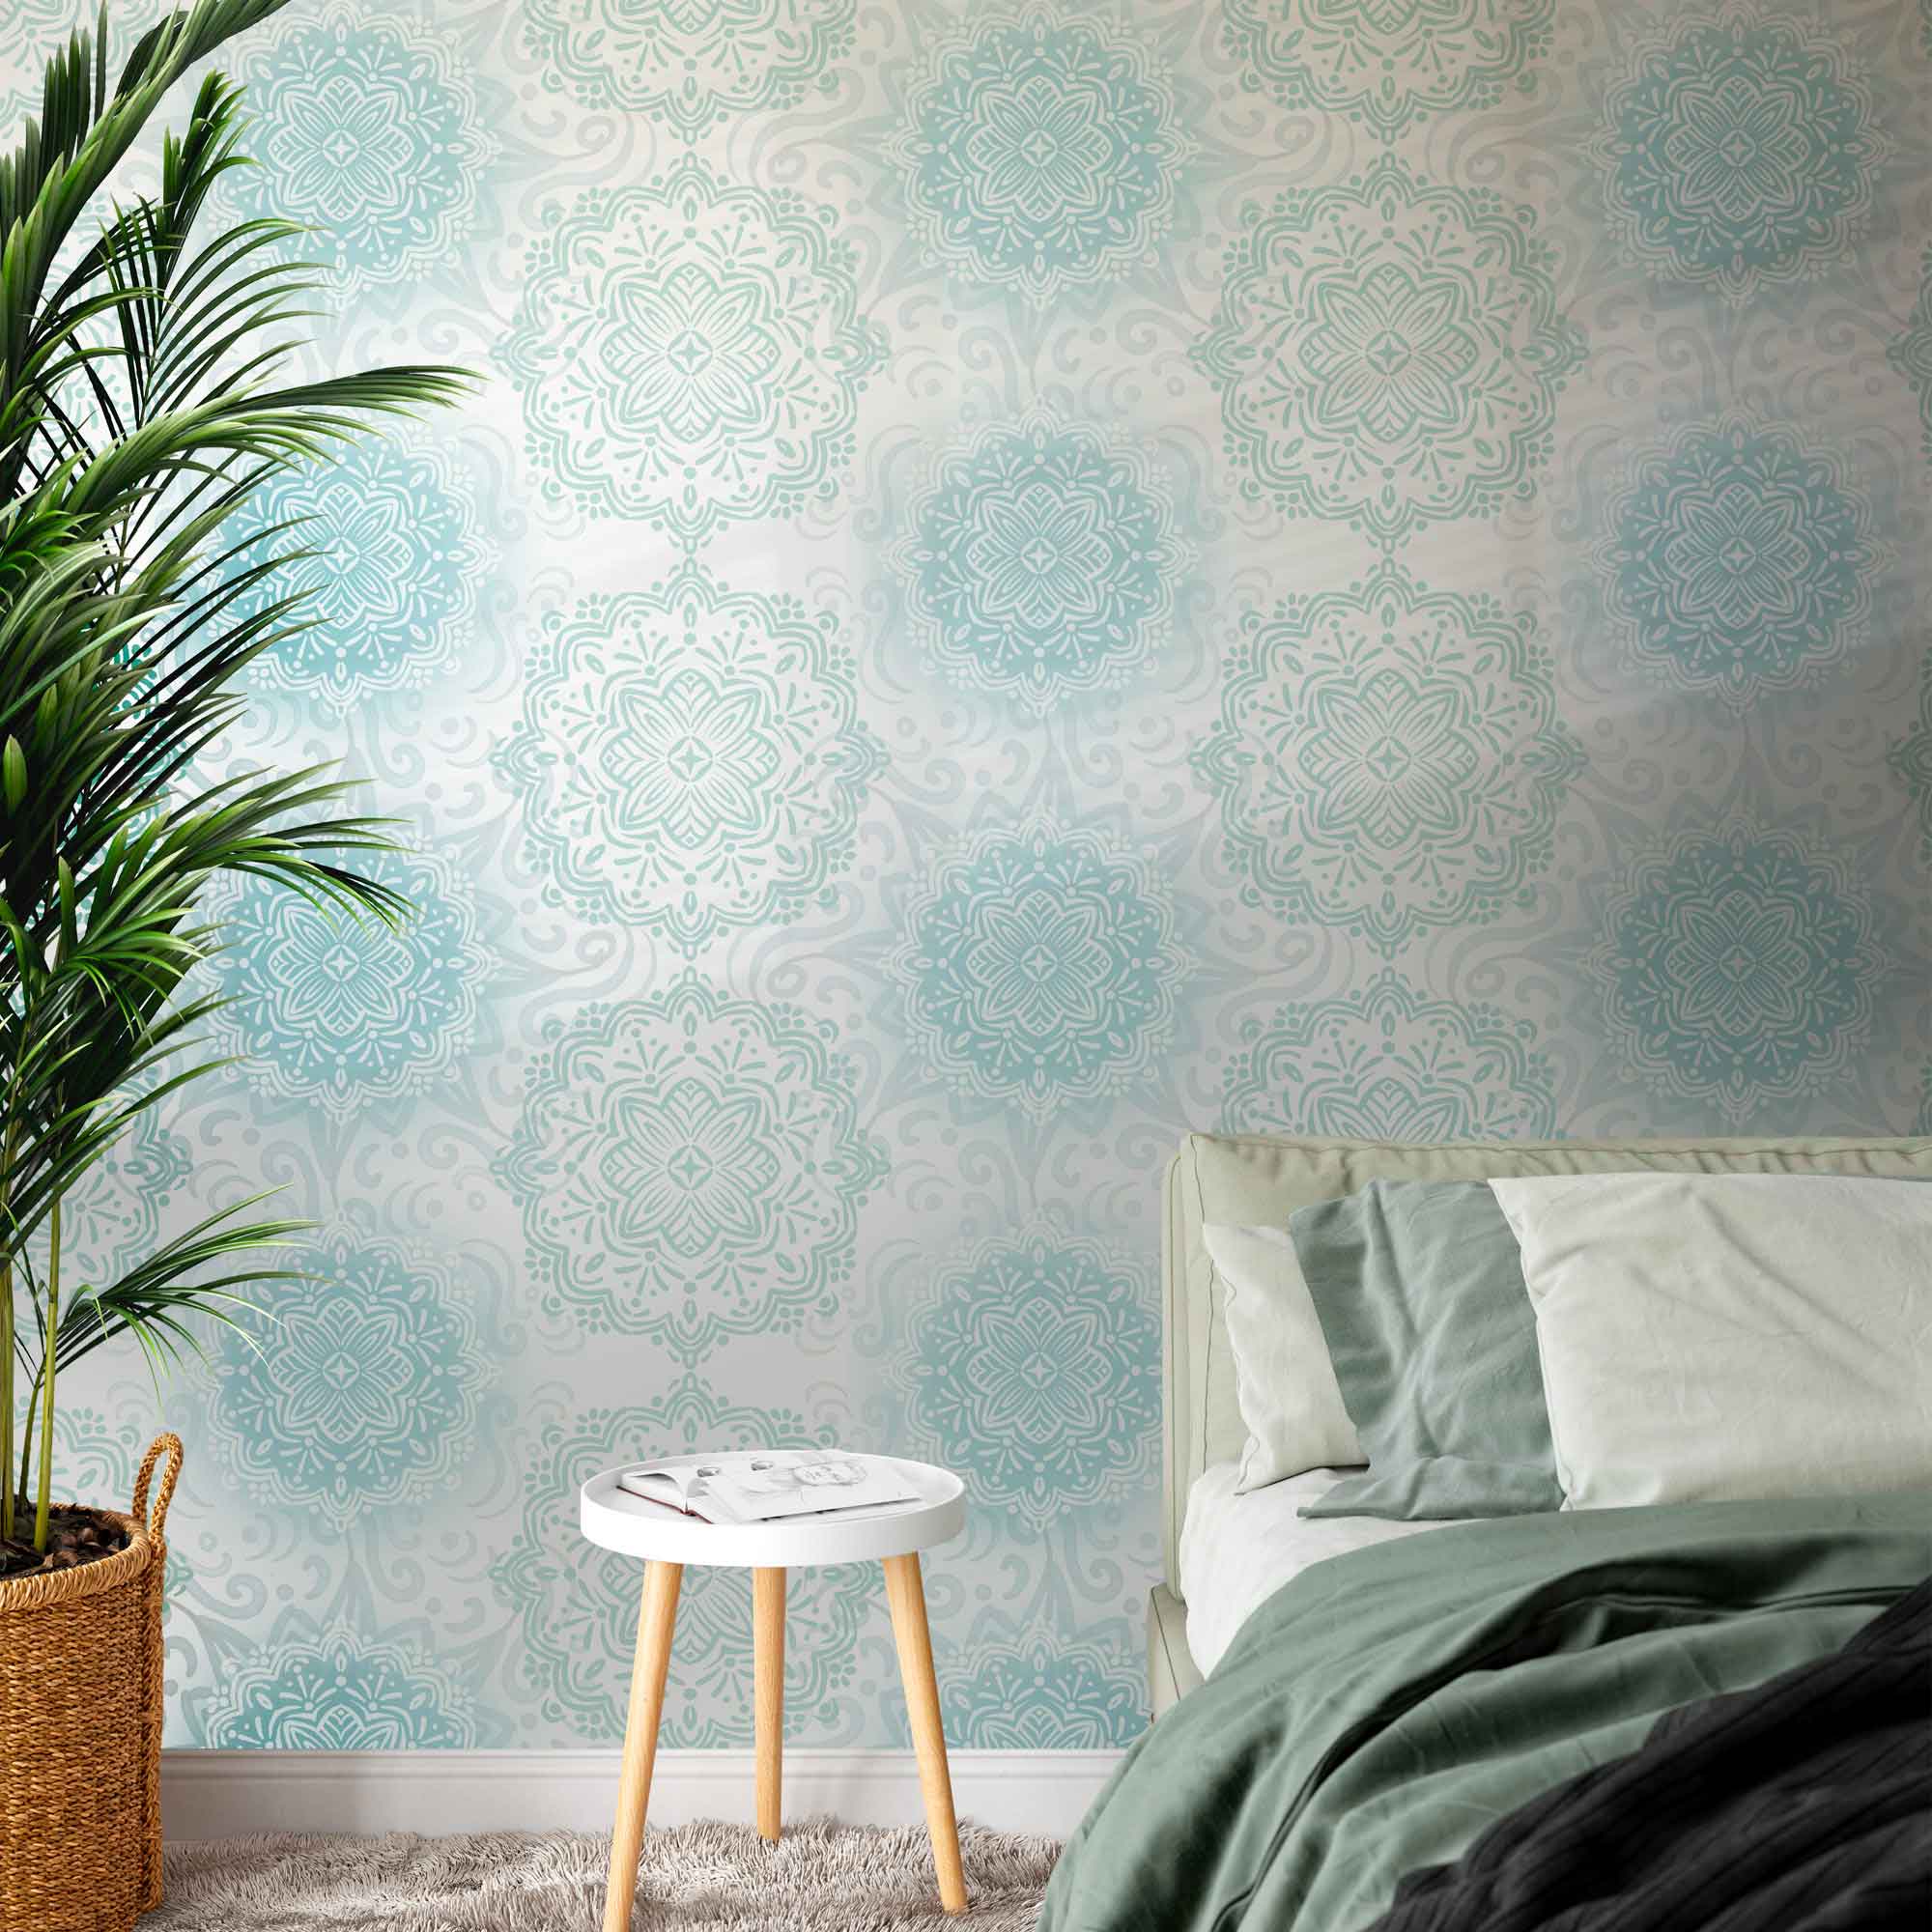 Boho Hand-drawn Mandalas in pastel Blue and Aqua Removable Peel & Stick and Pre-Pasted Wallpaper Bedroom example